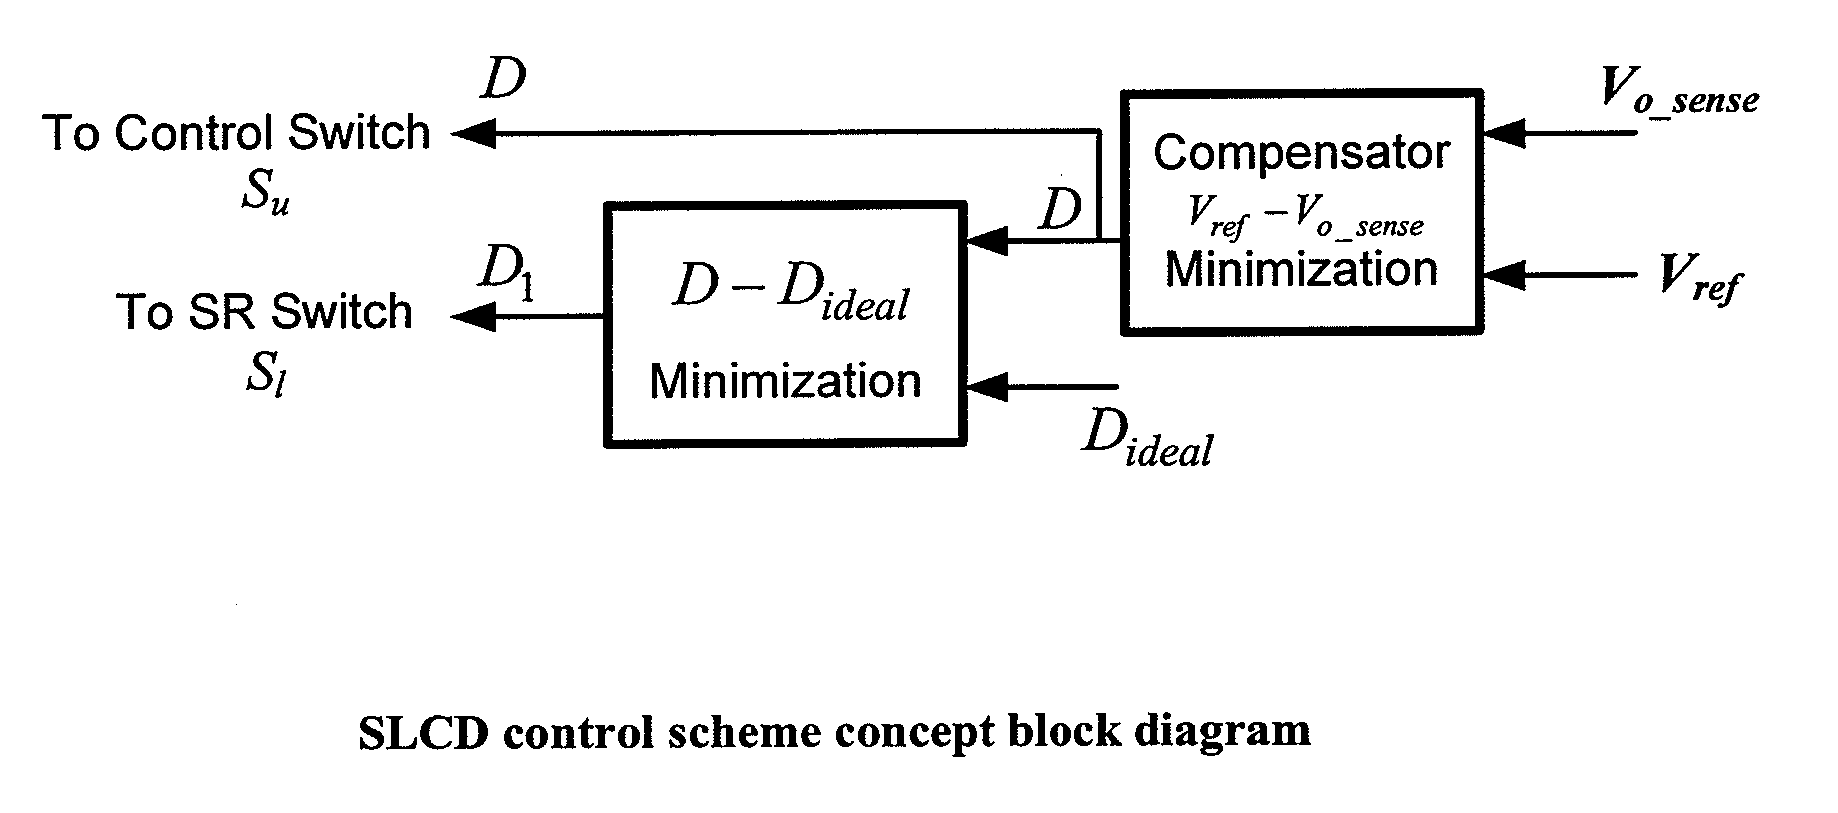 Sensor-less operation and detection of ccm and dcm operation modes in synchronous switching power converters